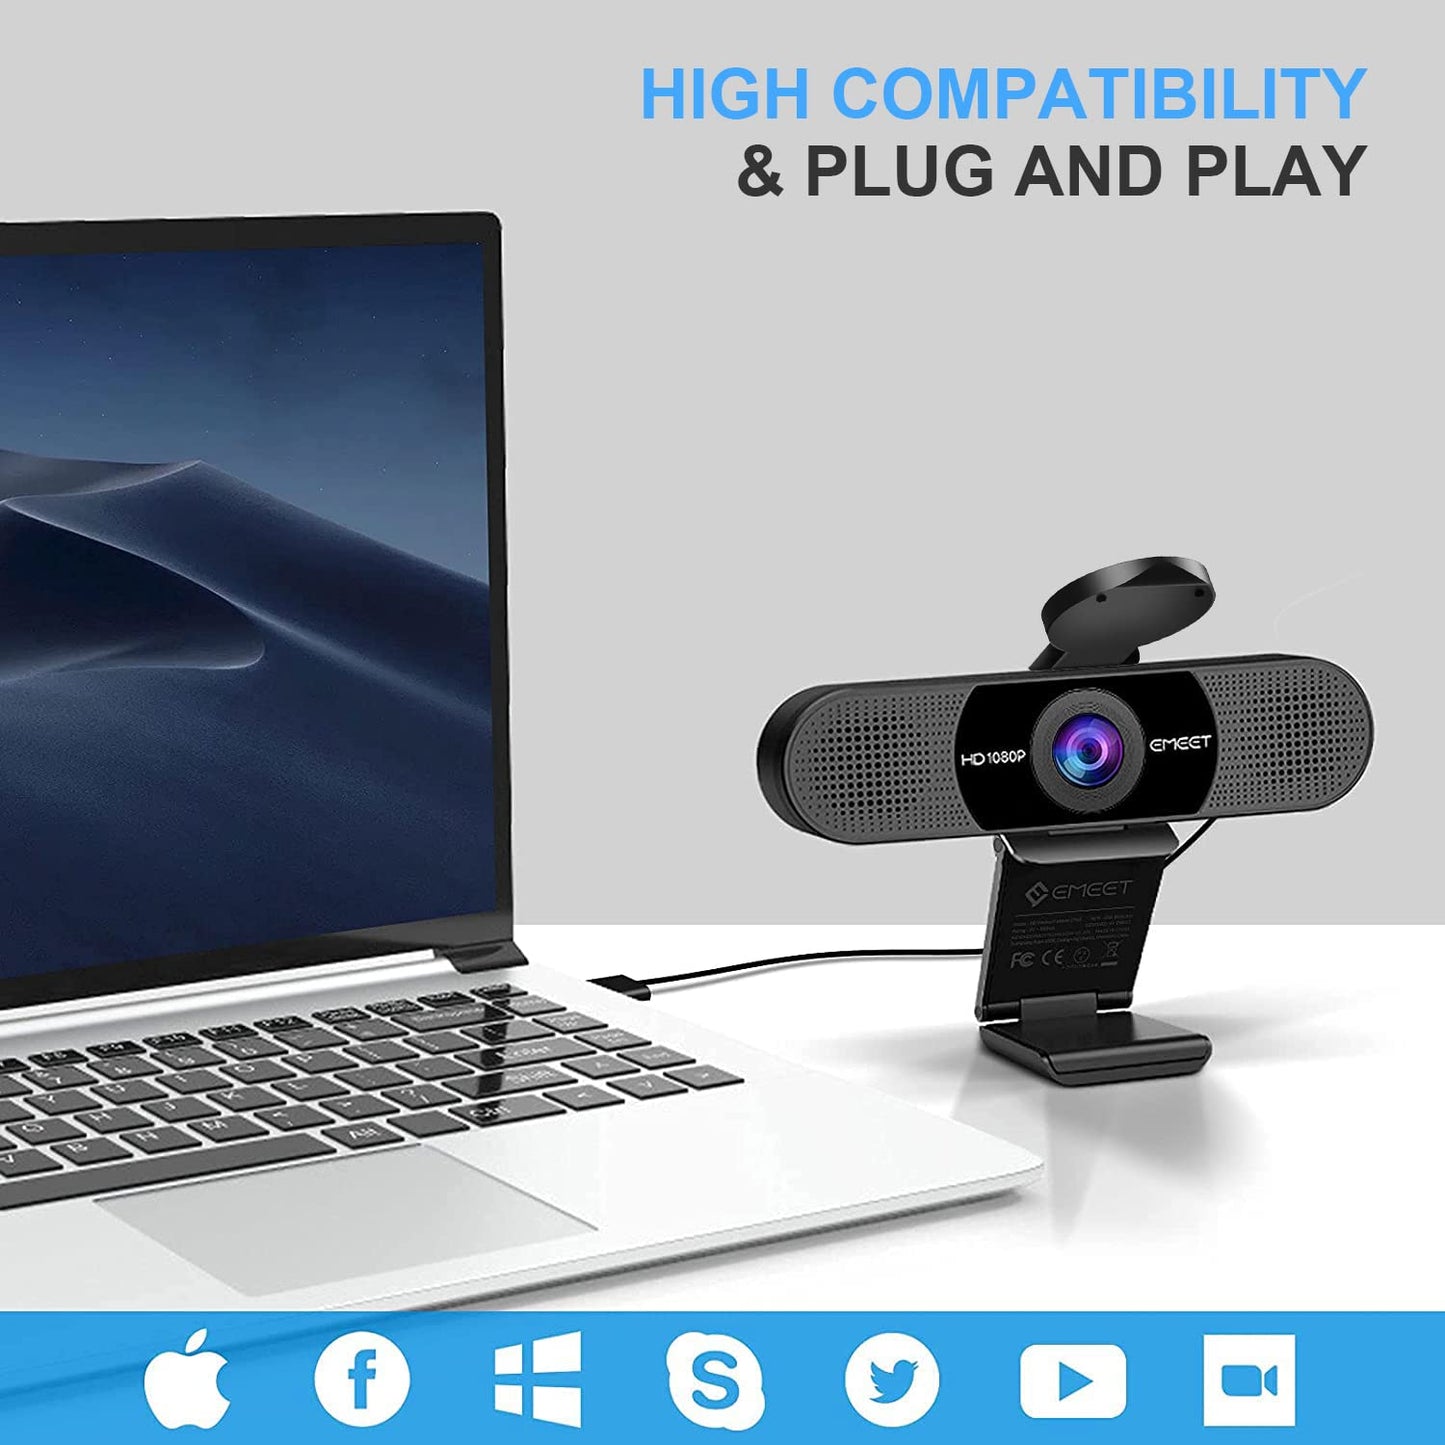 EMEET 1080P Webcam with Microphone, C960 Web Camera, 2 Mics Streaming Webcam, 90°FOV Computer Camera, Plug and Play USB Webcam for Online Calling/Conferencing, Zoom/Skype/Facetime/YouTube, Laptop/PC